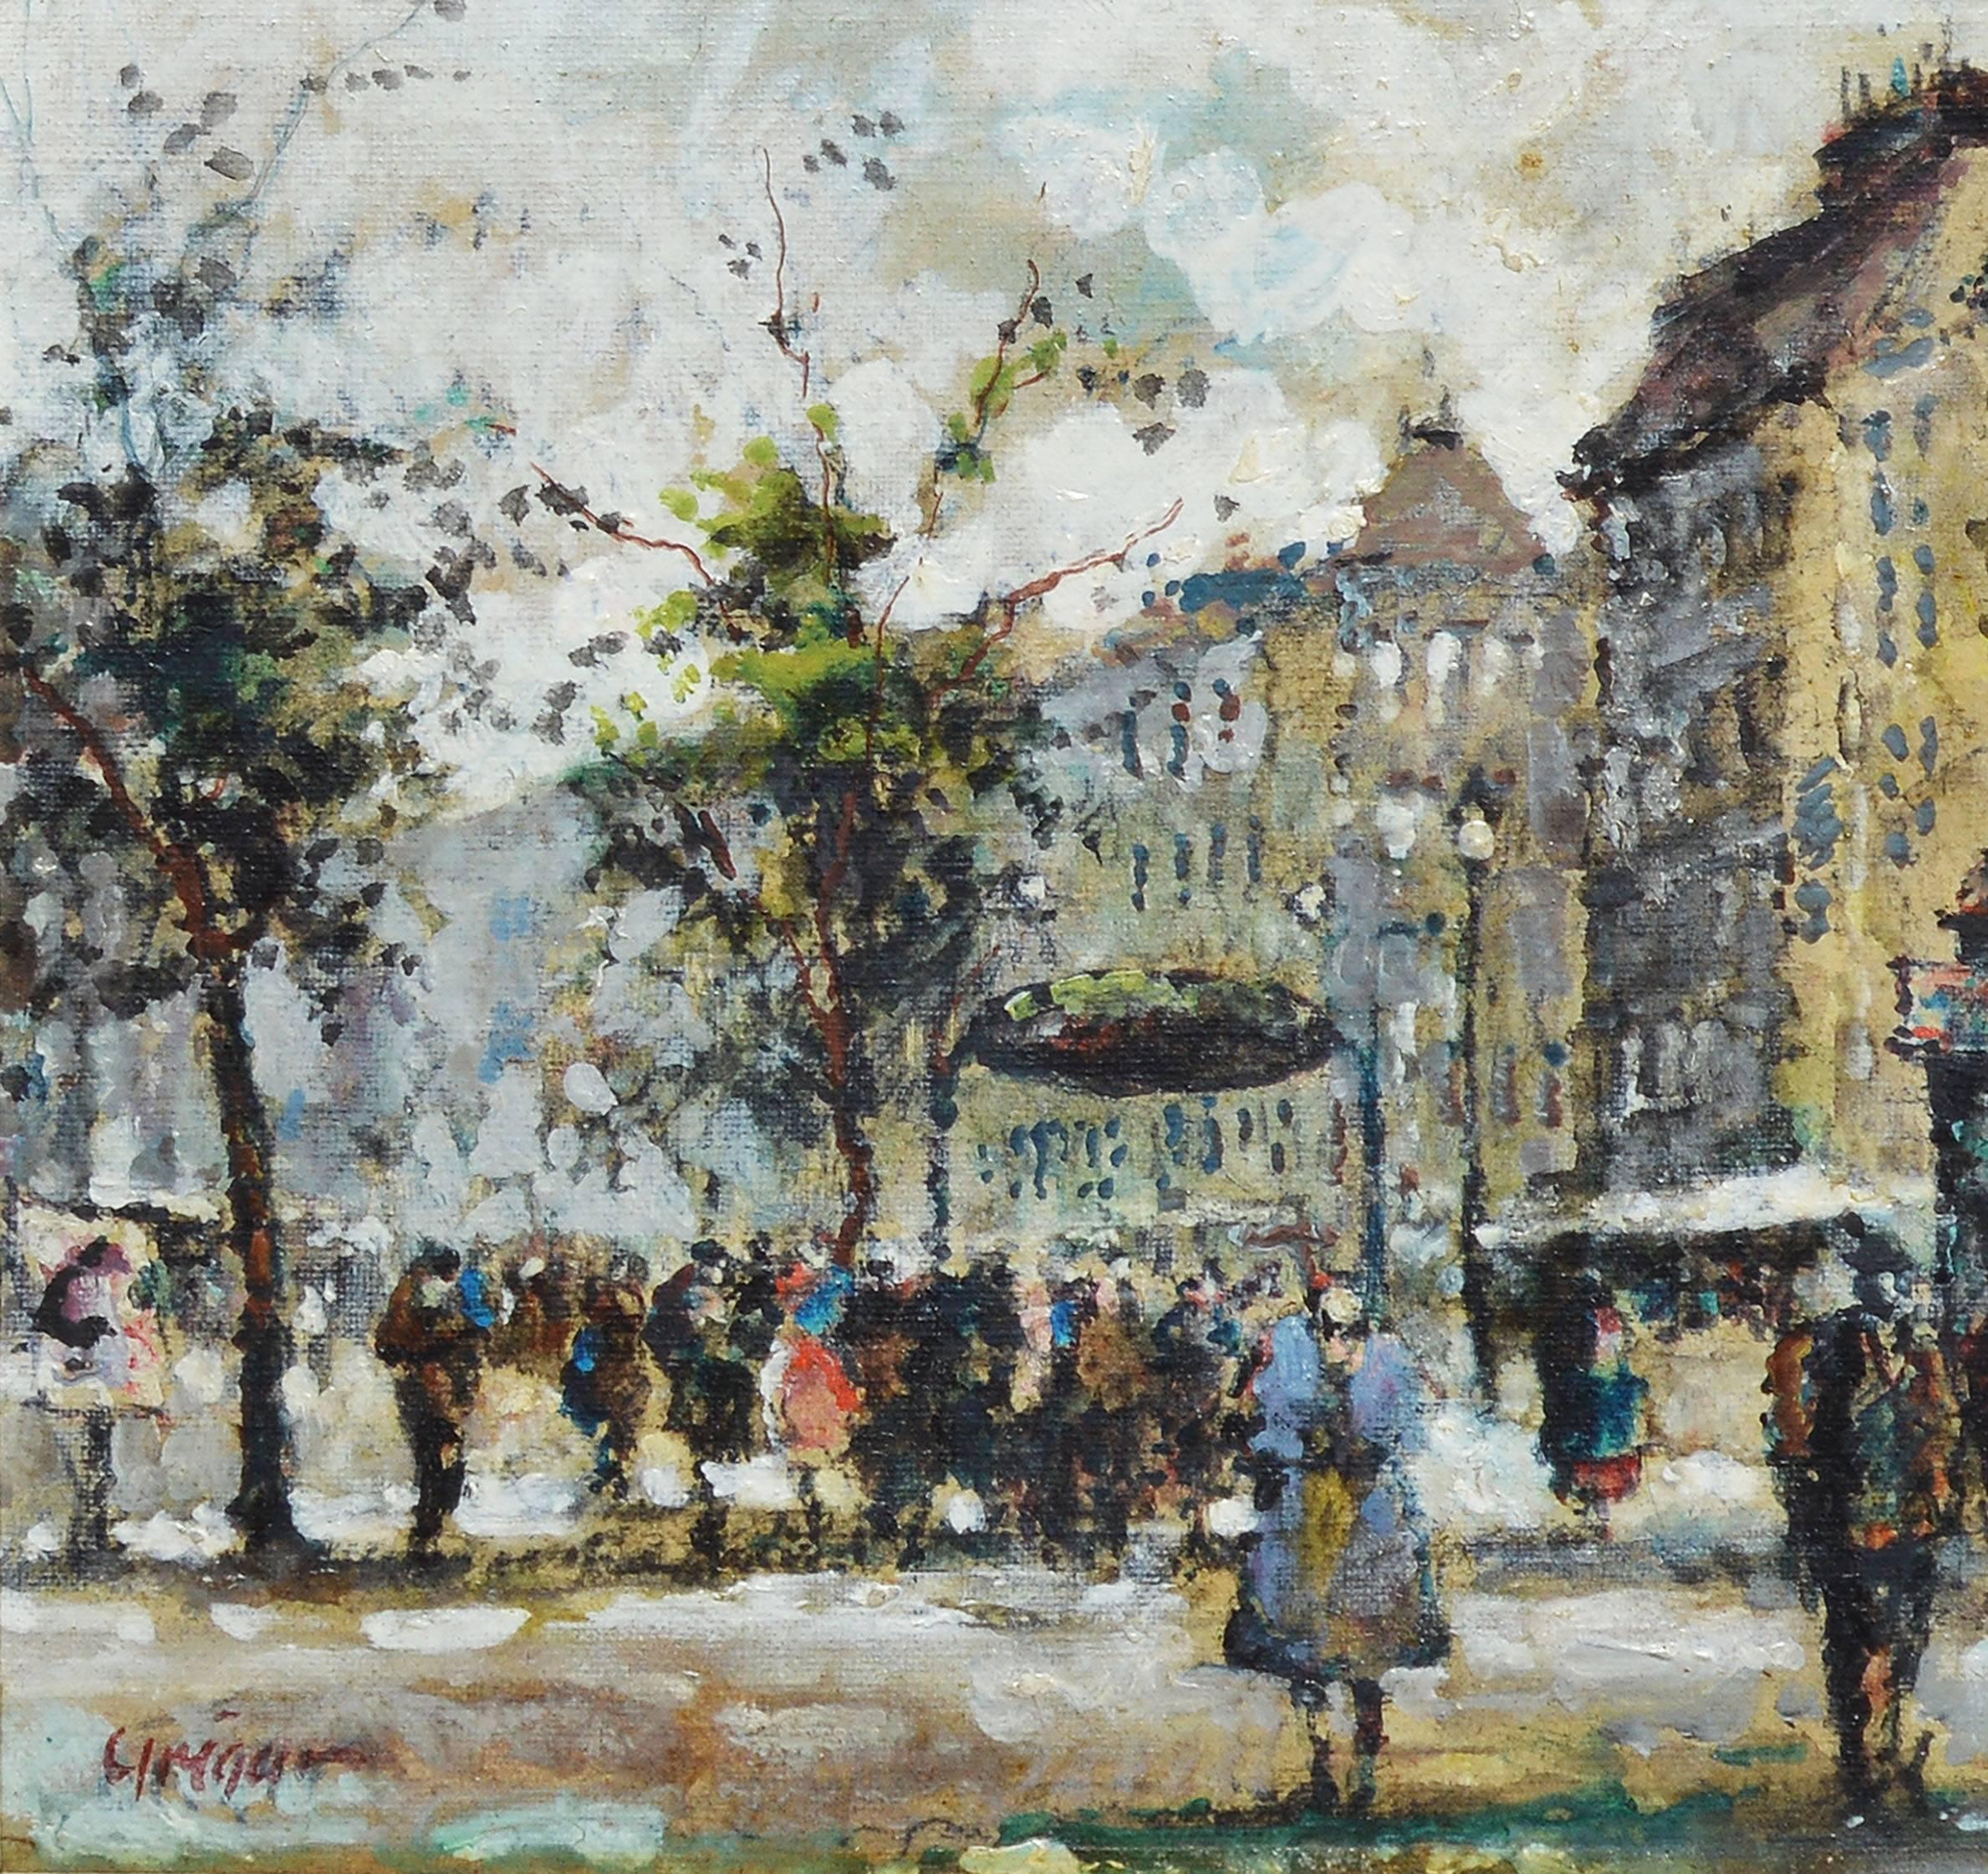 Impressionist Paris School street scene.  Oil on board, circa 1940.  Signed illegibly lower left.  Displayed in a period frame.  Image size, 10